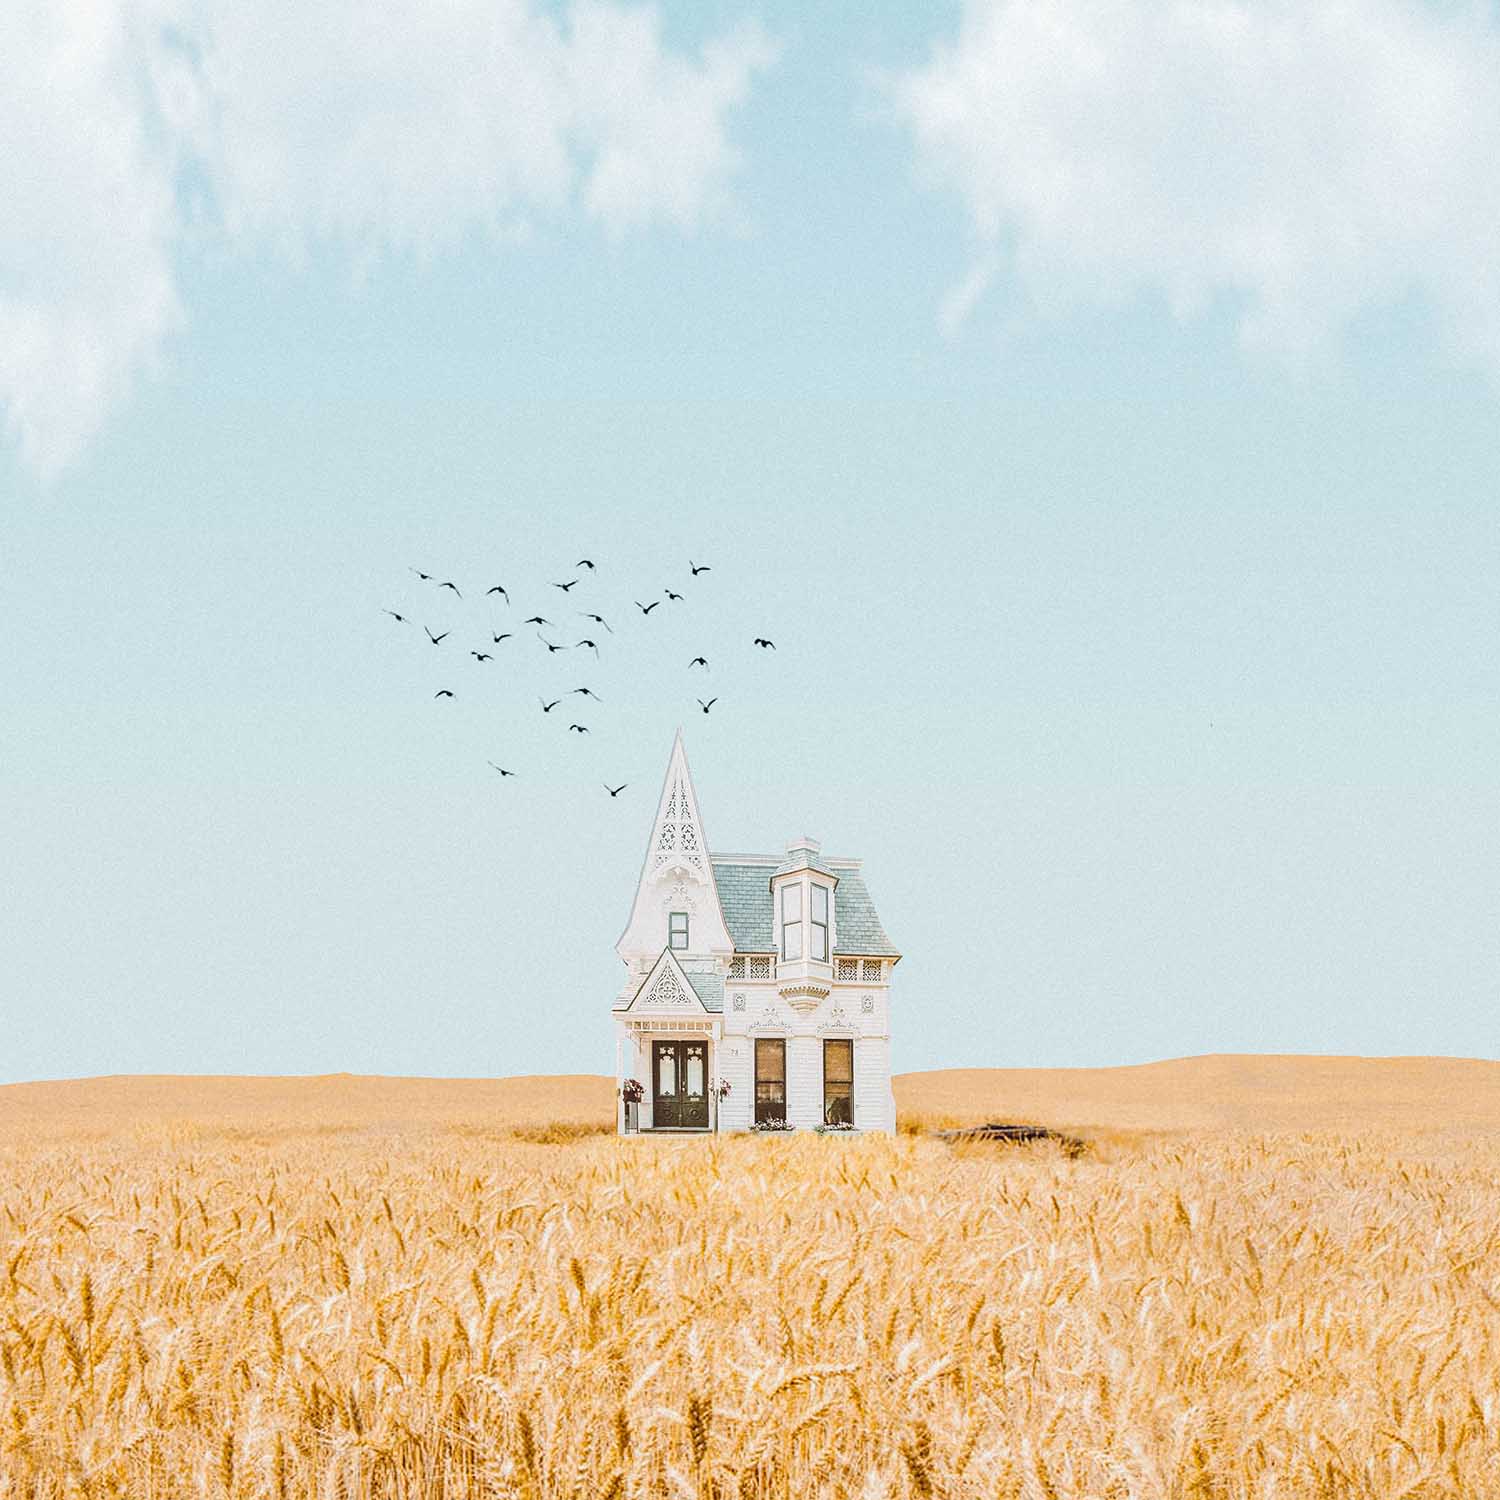 An illustration of a house on a field in a prairie with birds flying overtop.